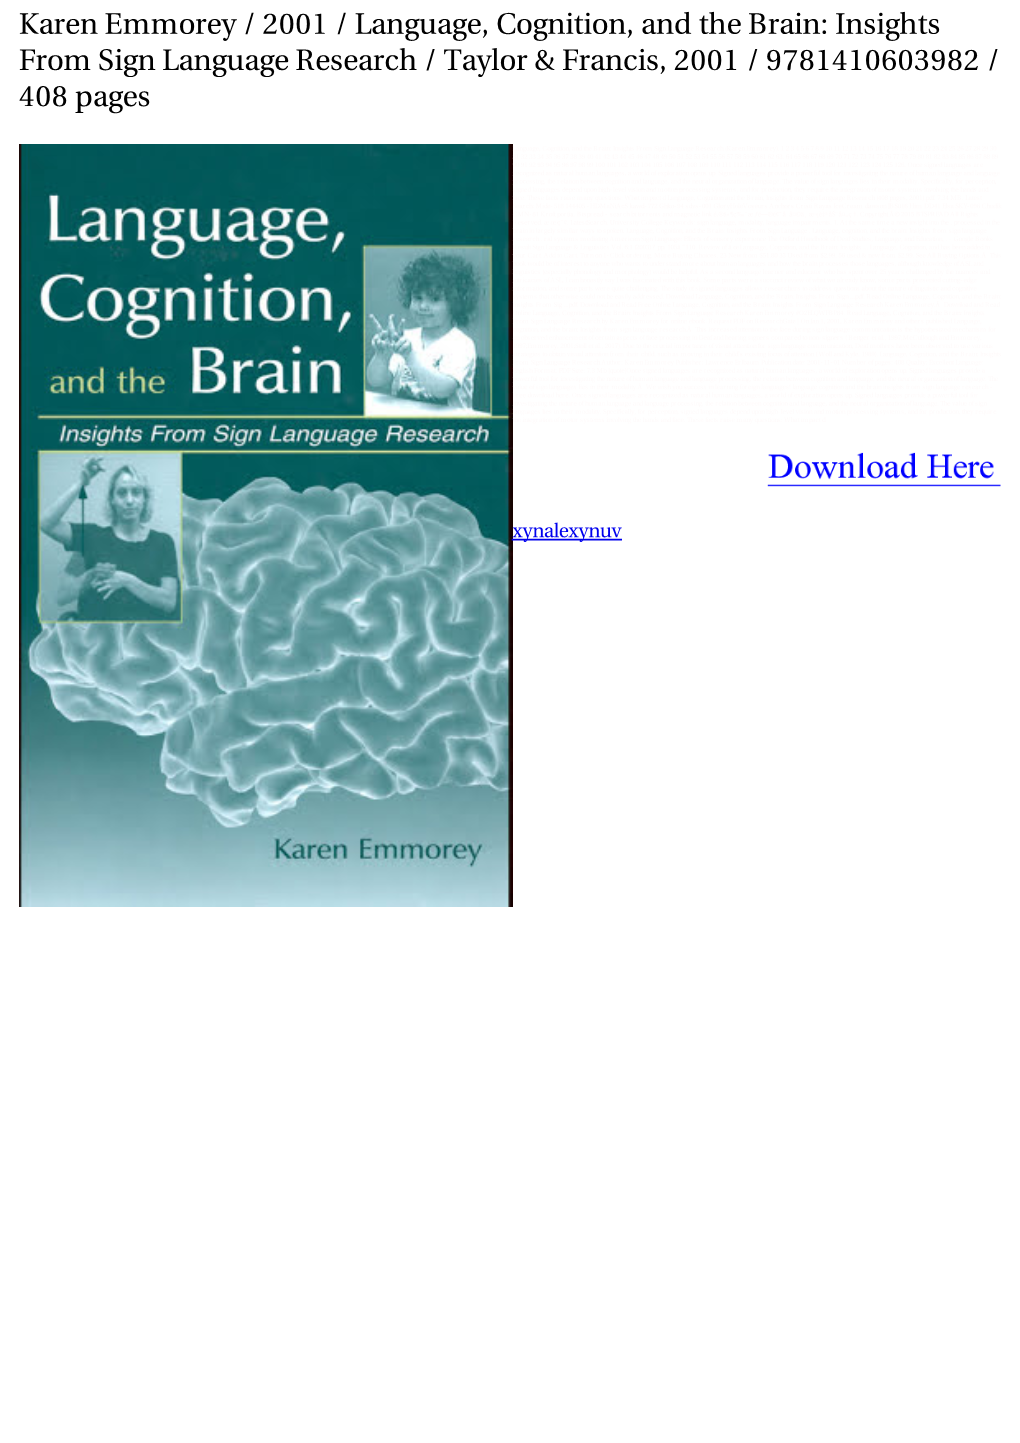 Karen Emmorey / 2001 / Language, Cognition, and the Brain: Insights from Sign Language Research / Taylor & Francis, 2001 / 9781410603982 / 408 Pages